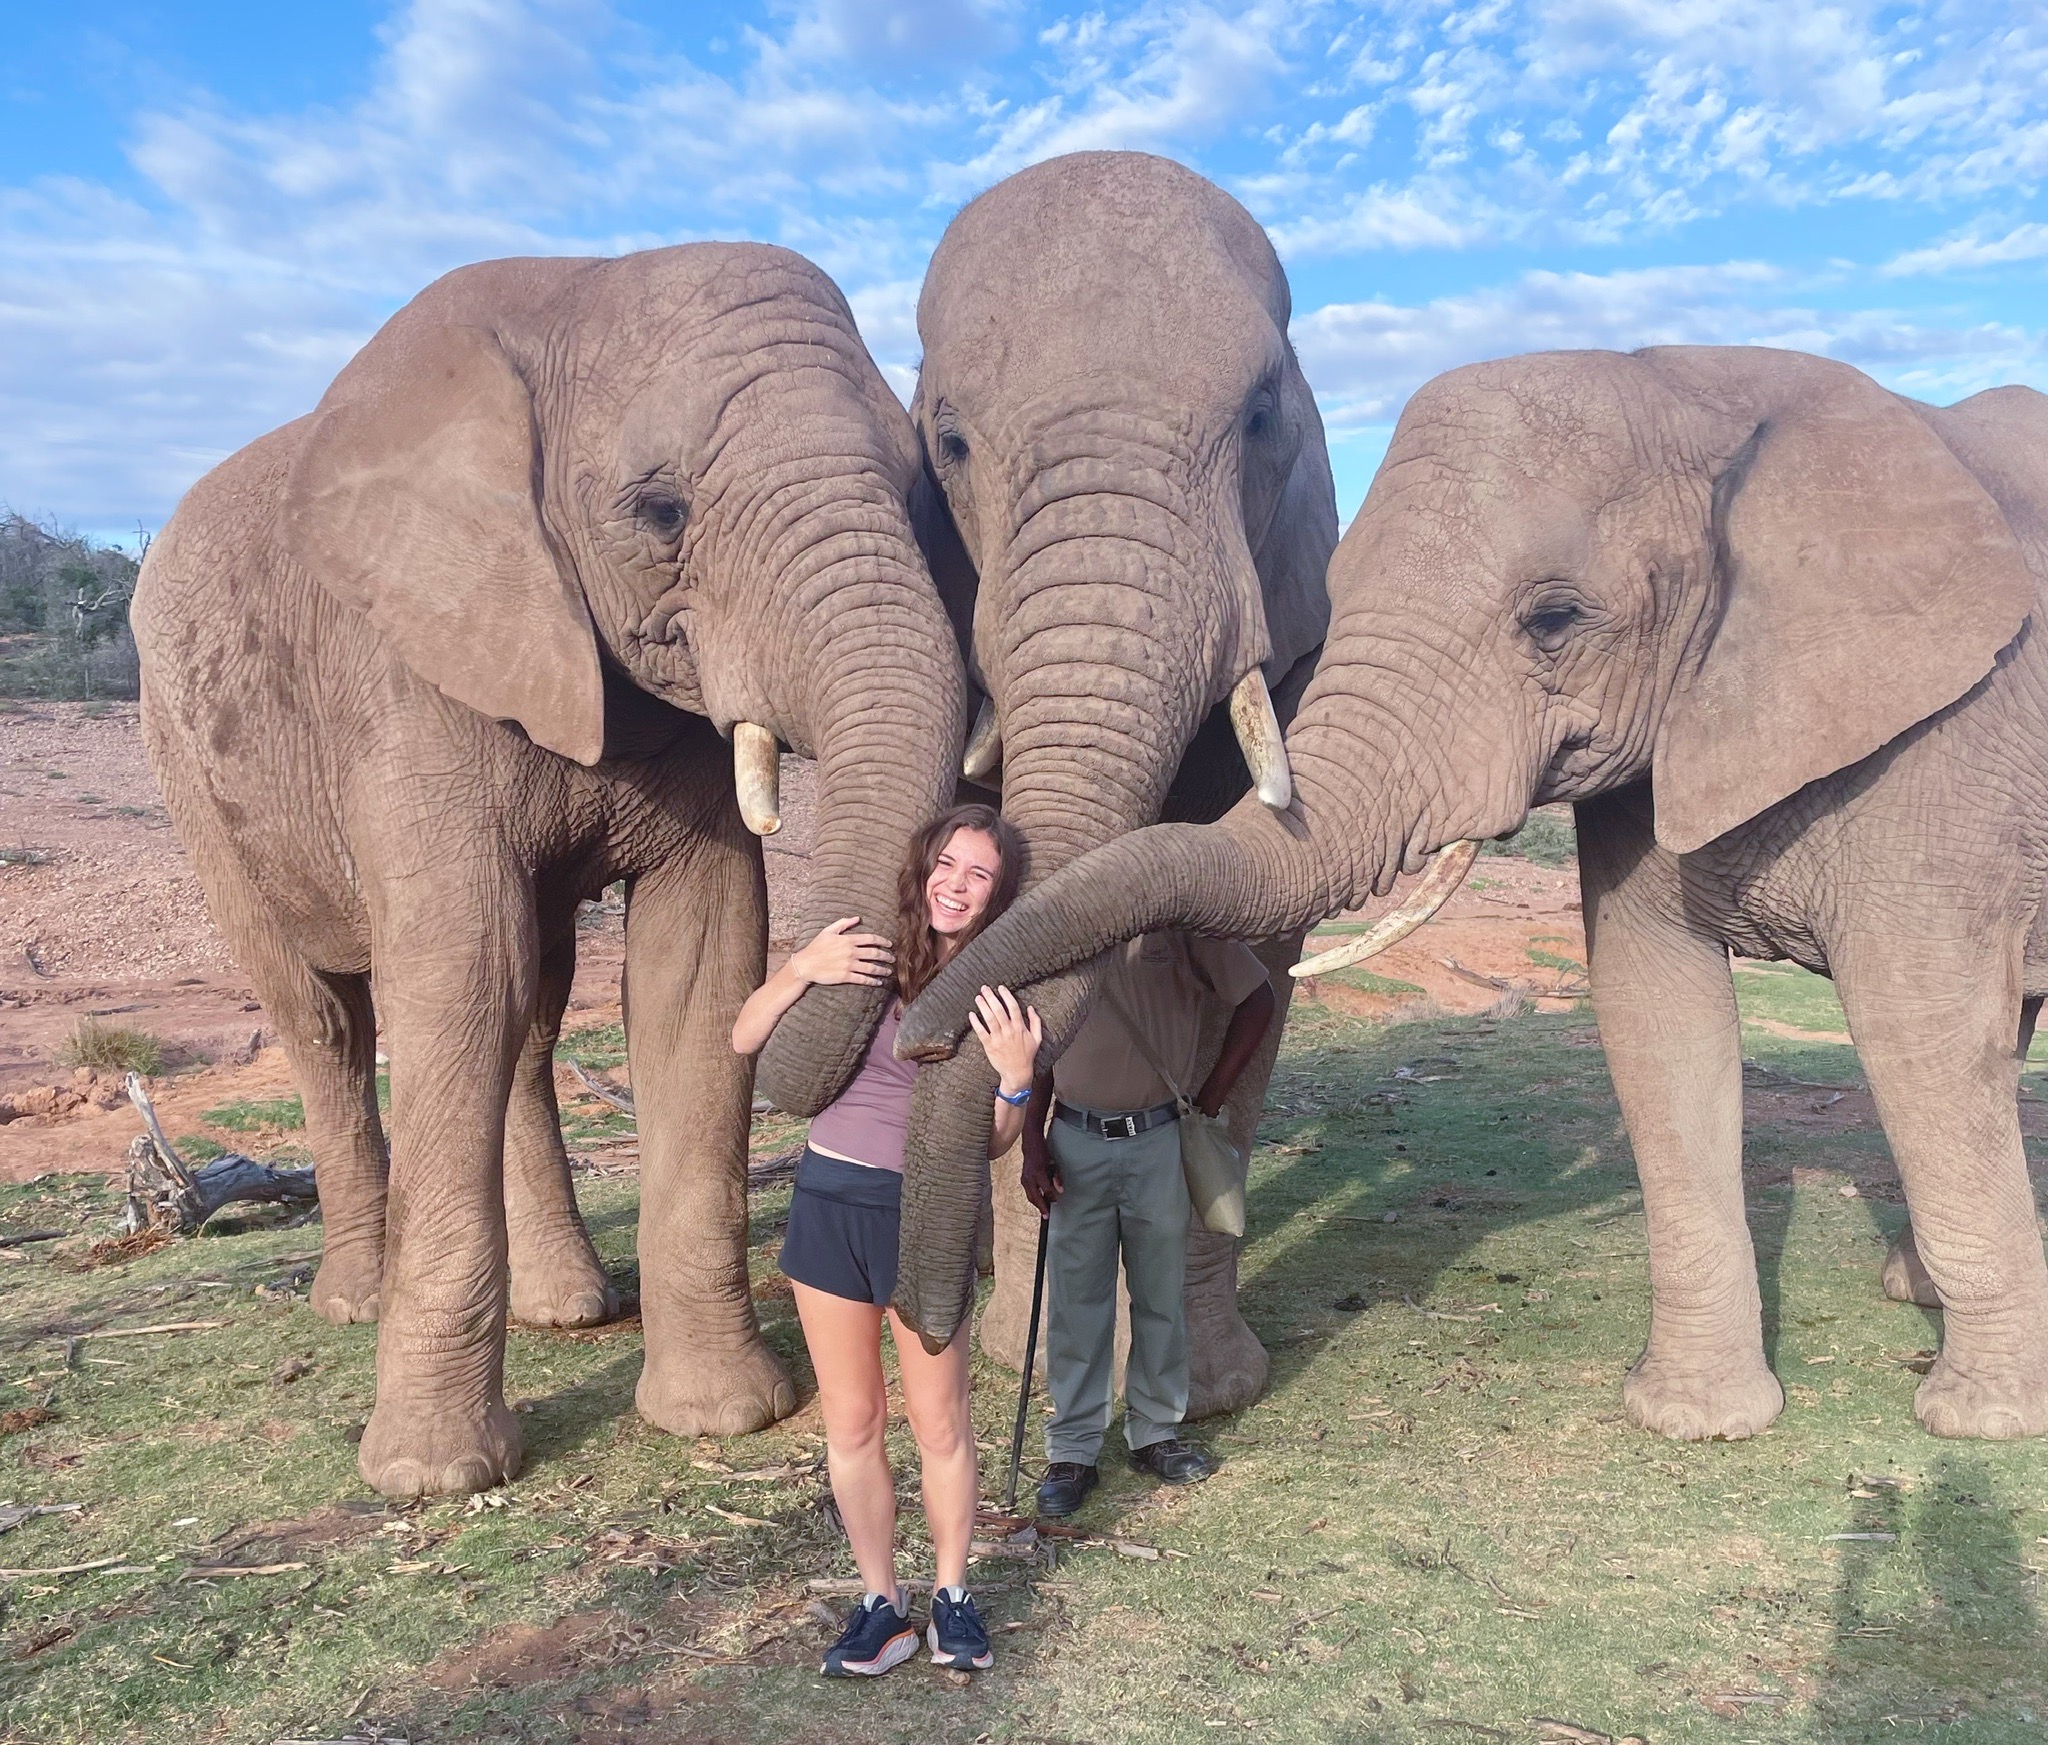 Studeny poses with three elephants, holding their trunks, during study abroad in South Africa.